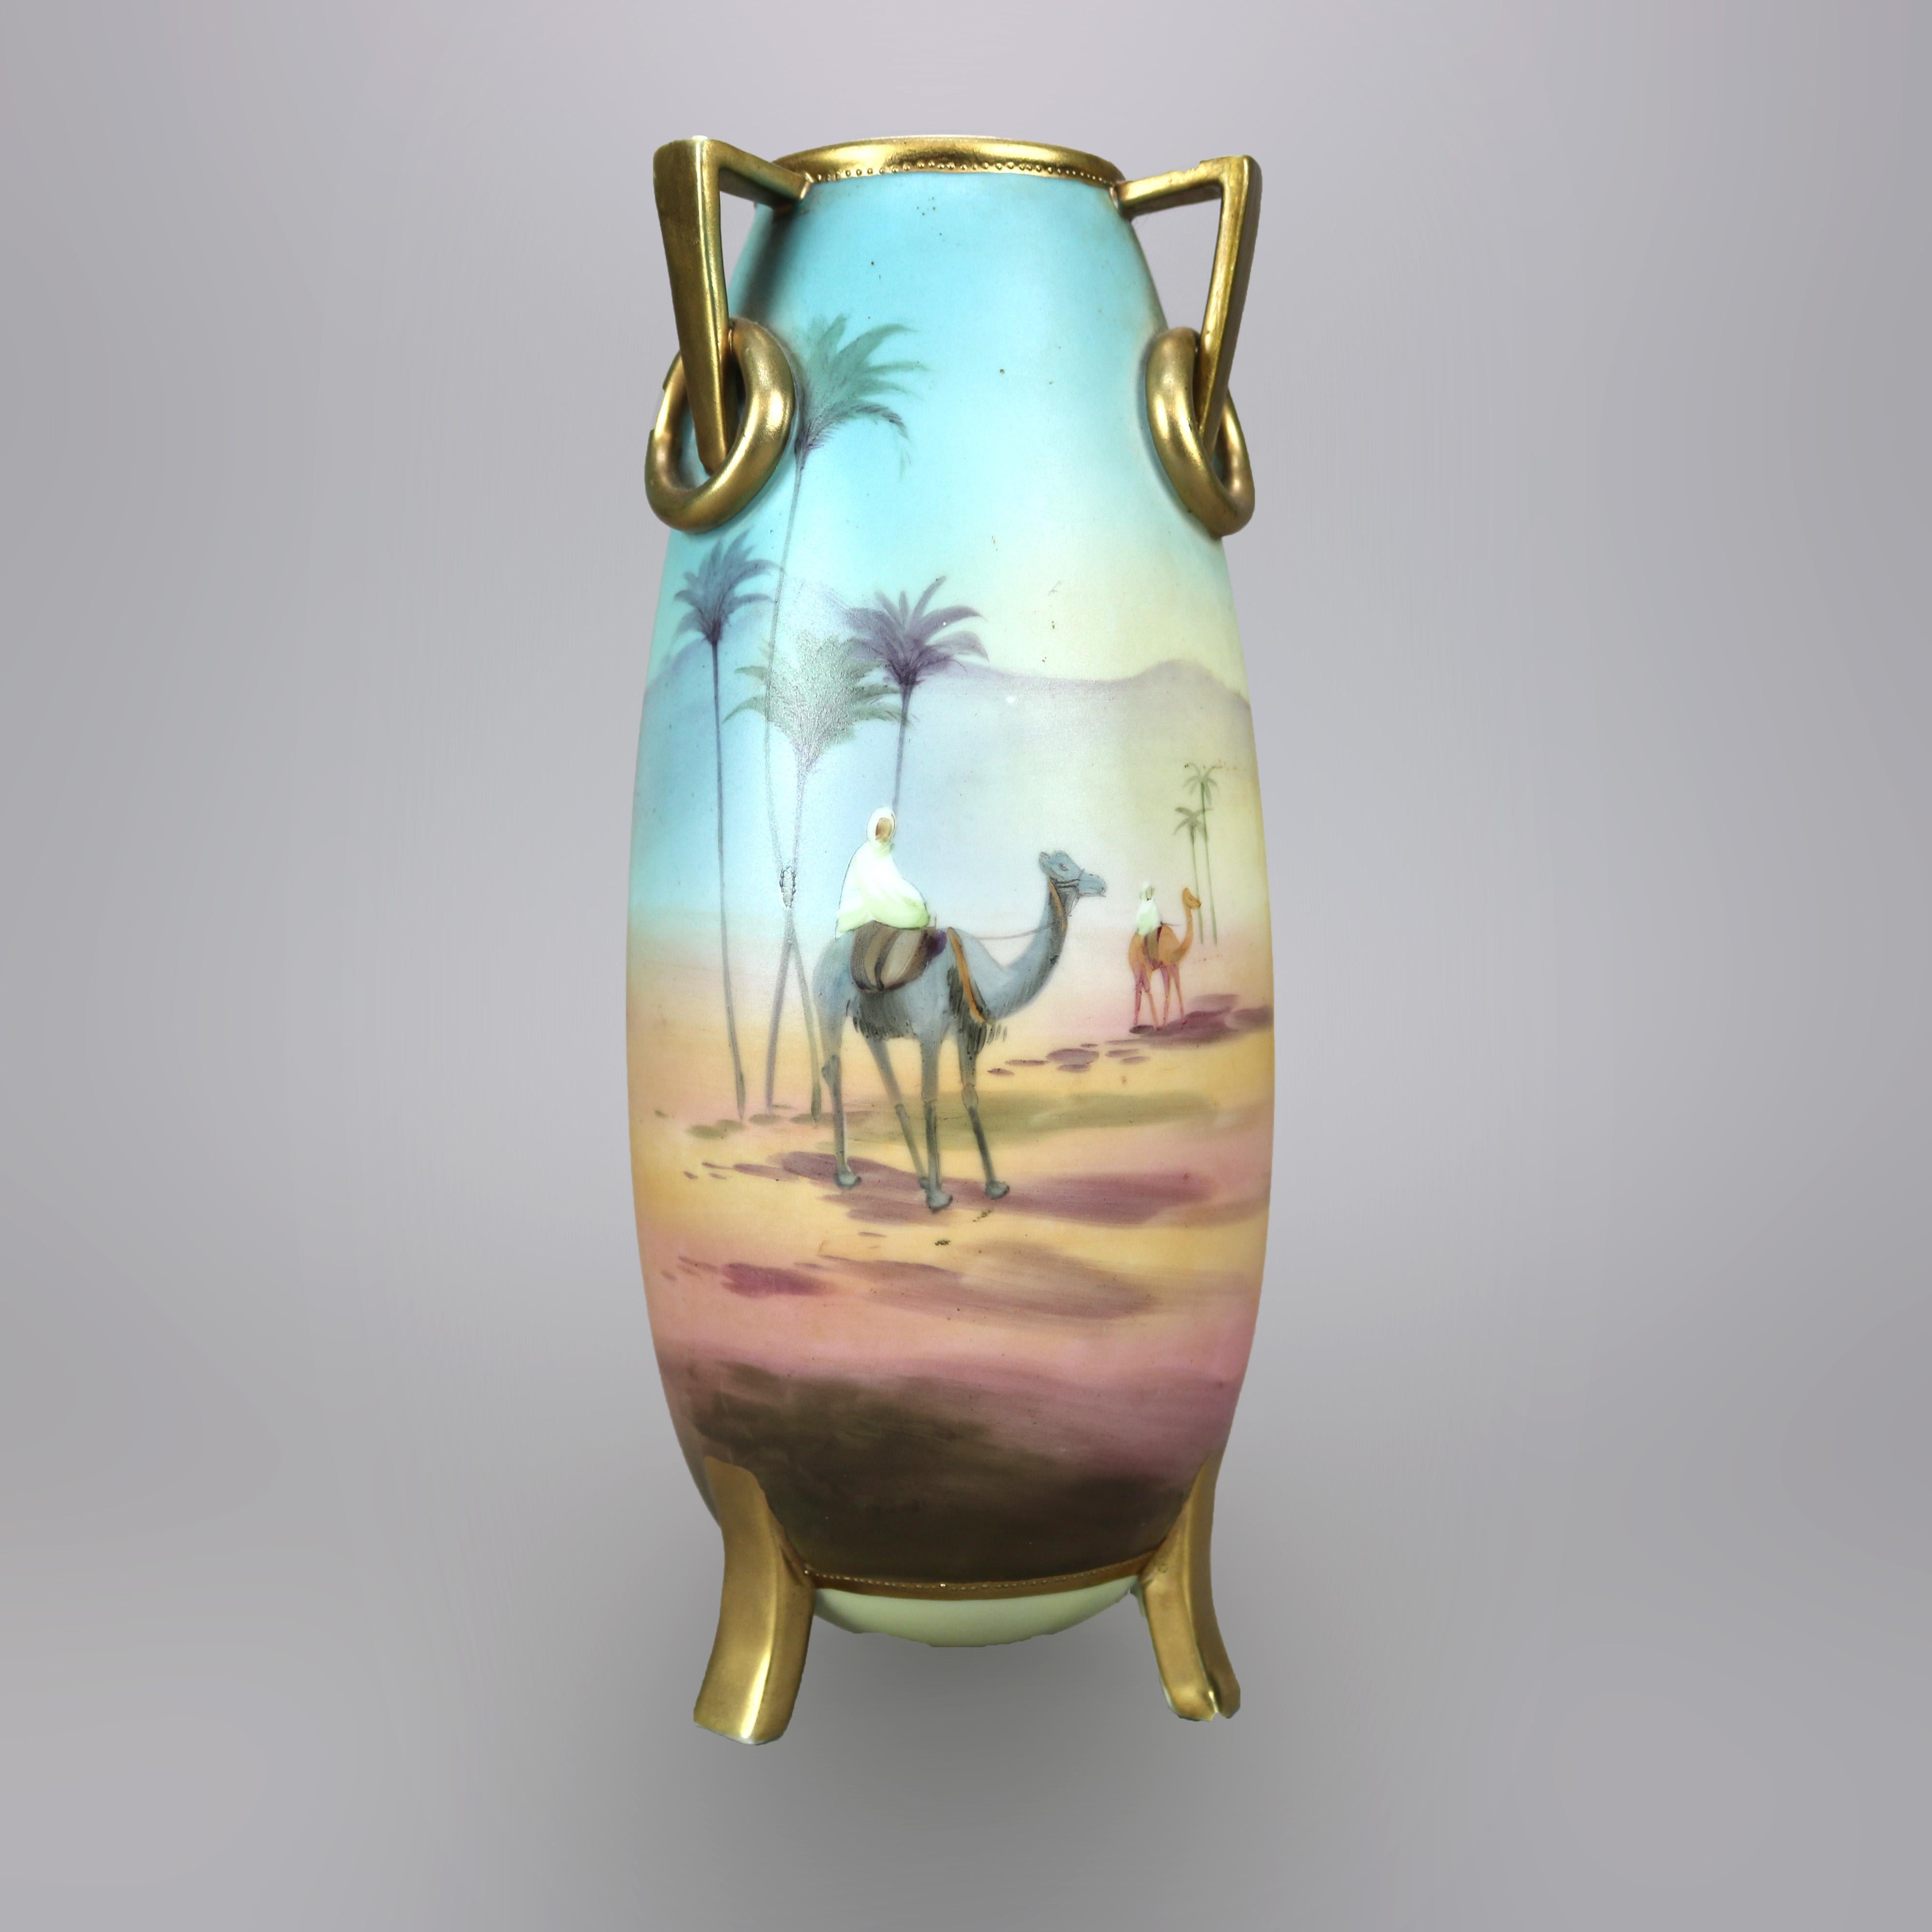 An antique Egyptian Revival Nippon vase offers porcelain construction with all-around hand painted Persian desert scene having figures and camels, gilt buttress handles having rings and raised on gilt tripod and flared legs, maker stamp on base as